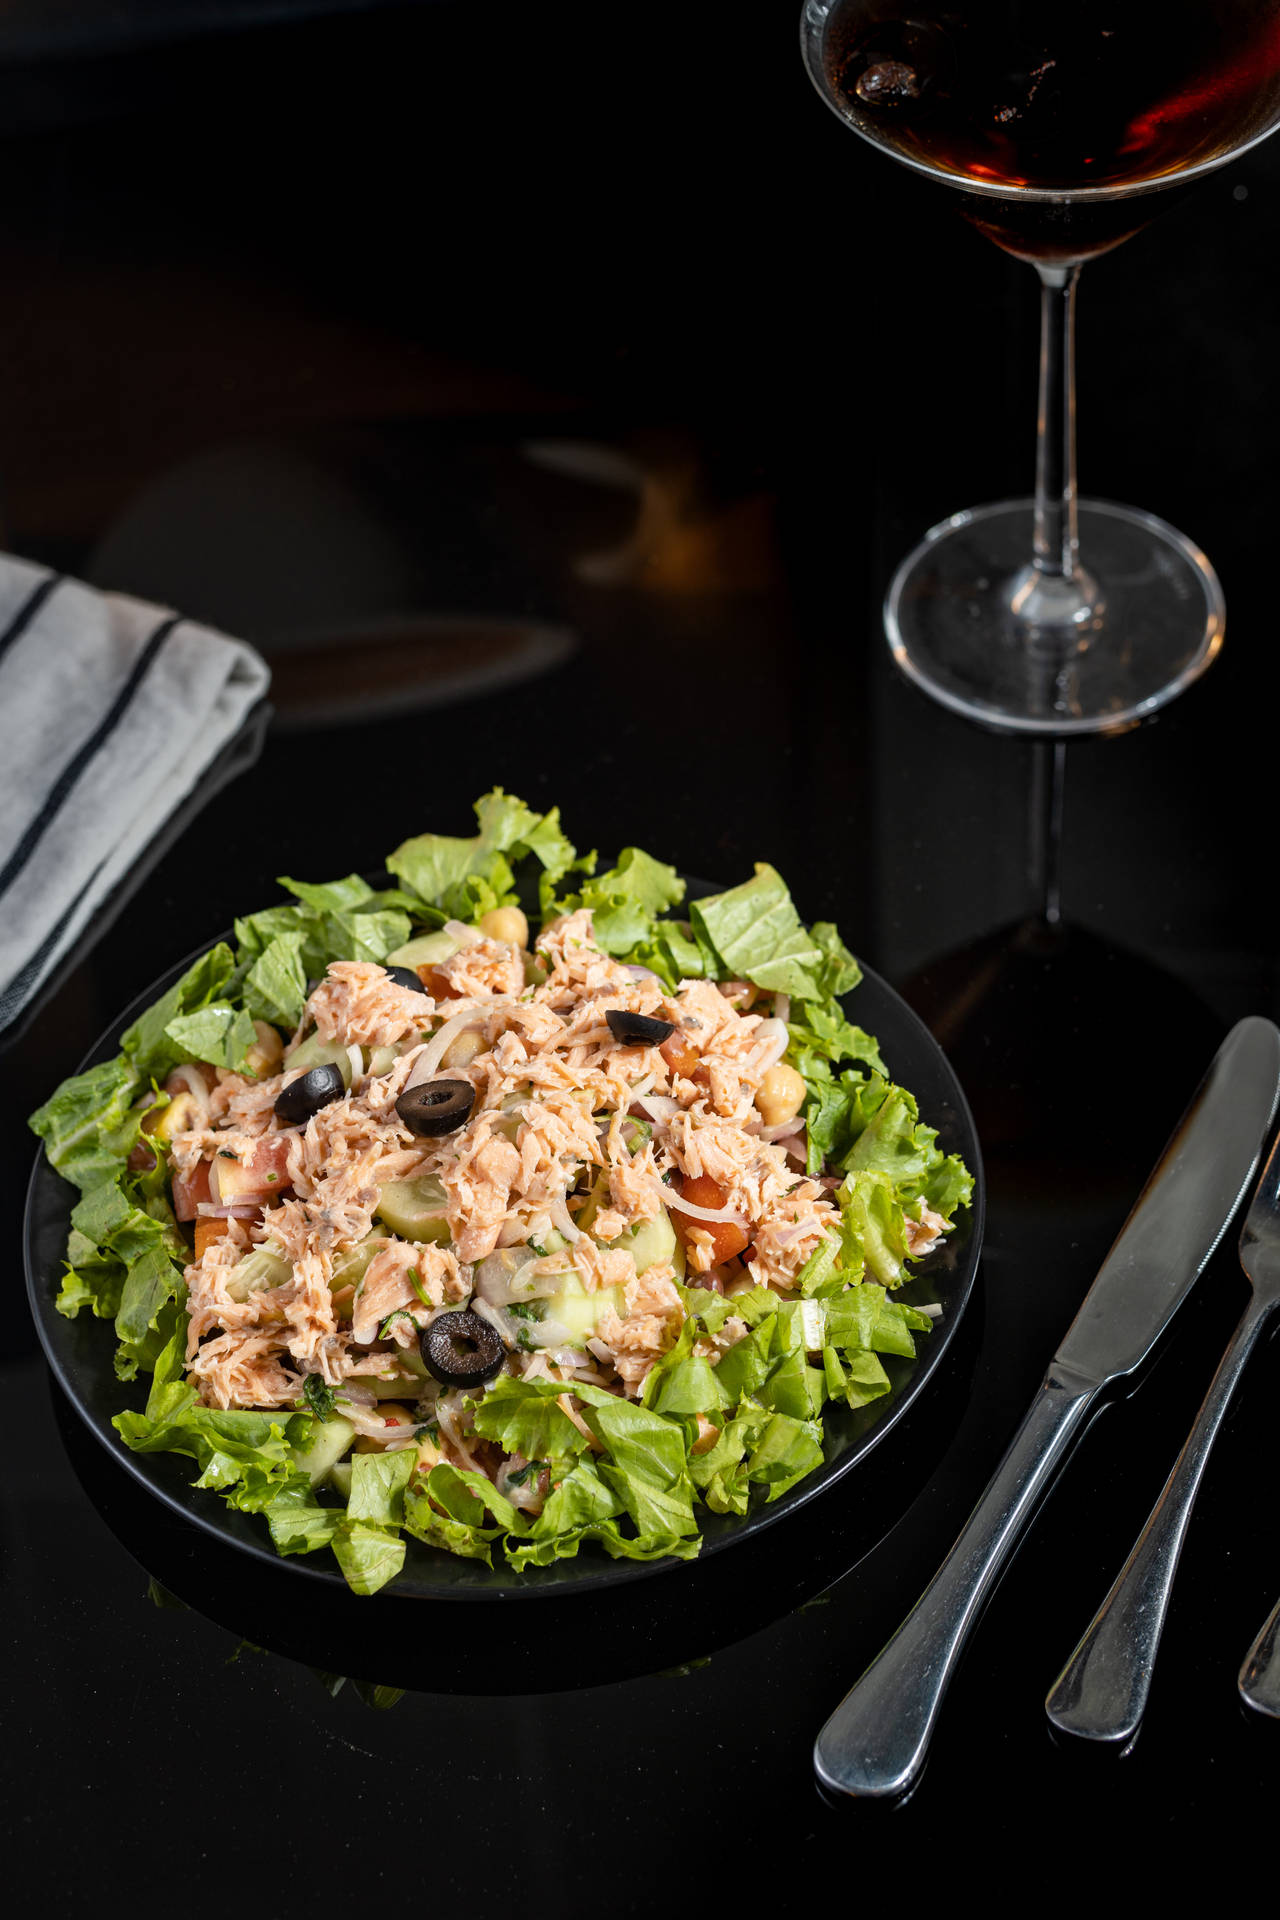 Chicken Salad With Olives Background